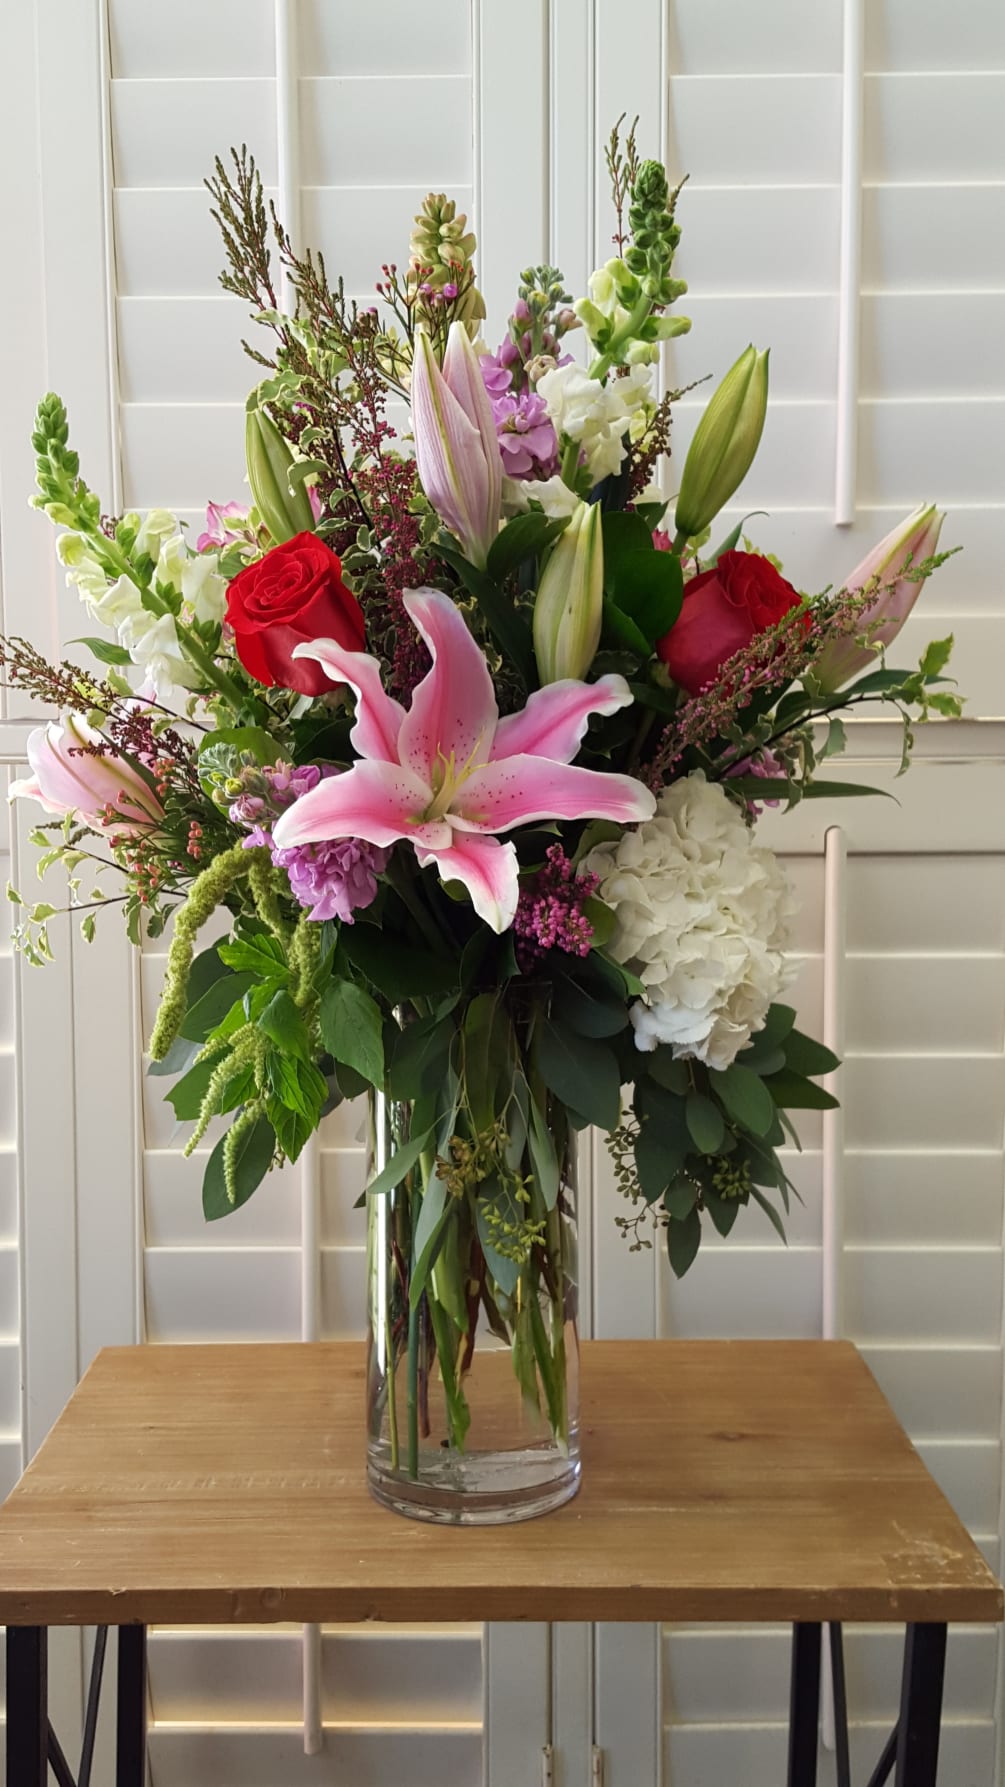 This beautiful vase arrangement is lush and filled of roses, hydrangea, lilies